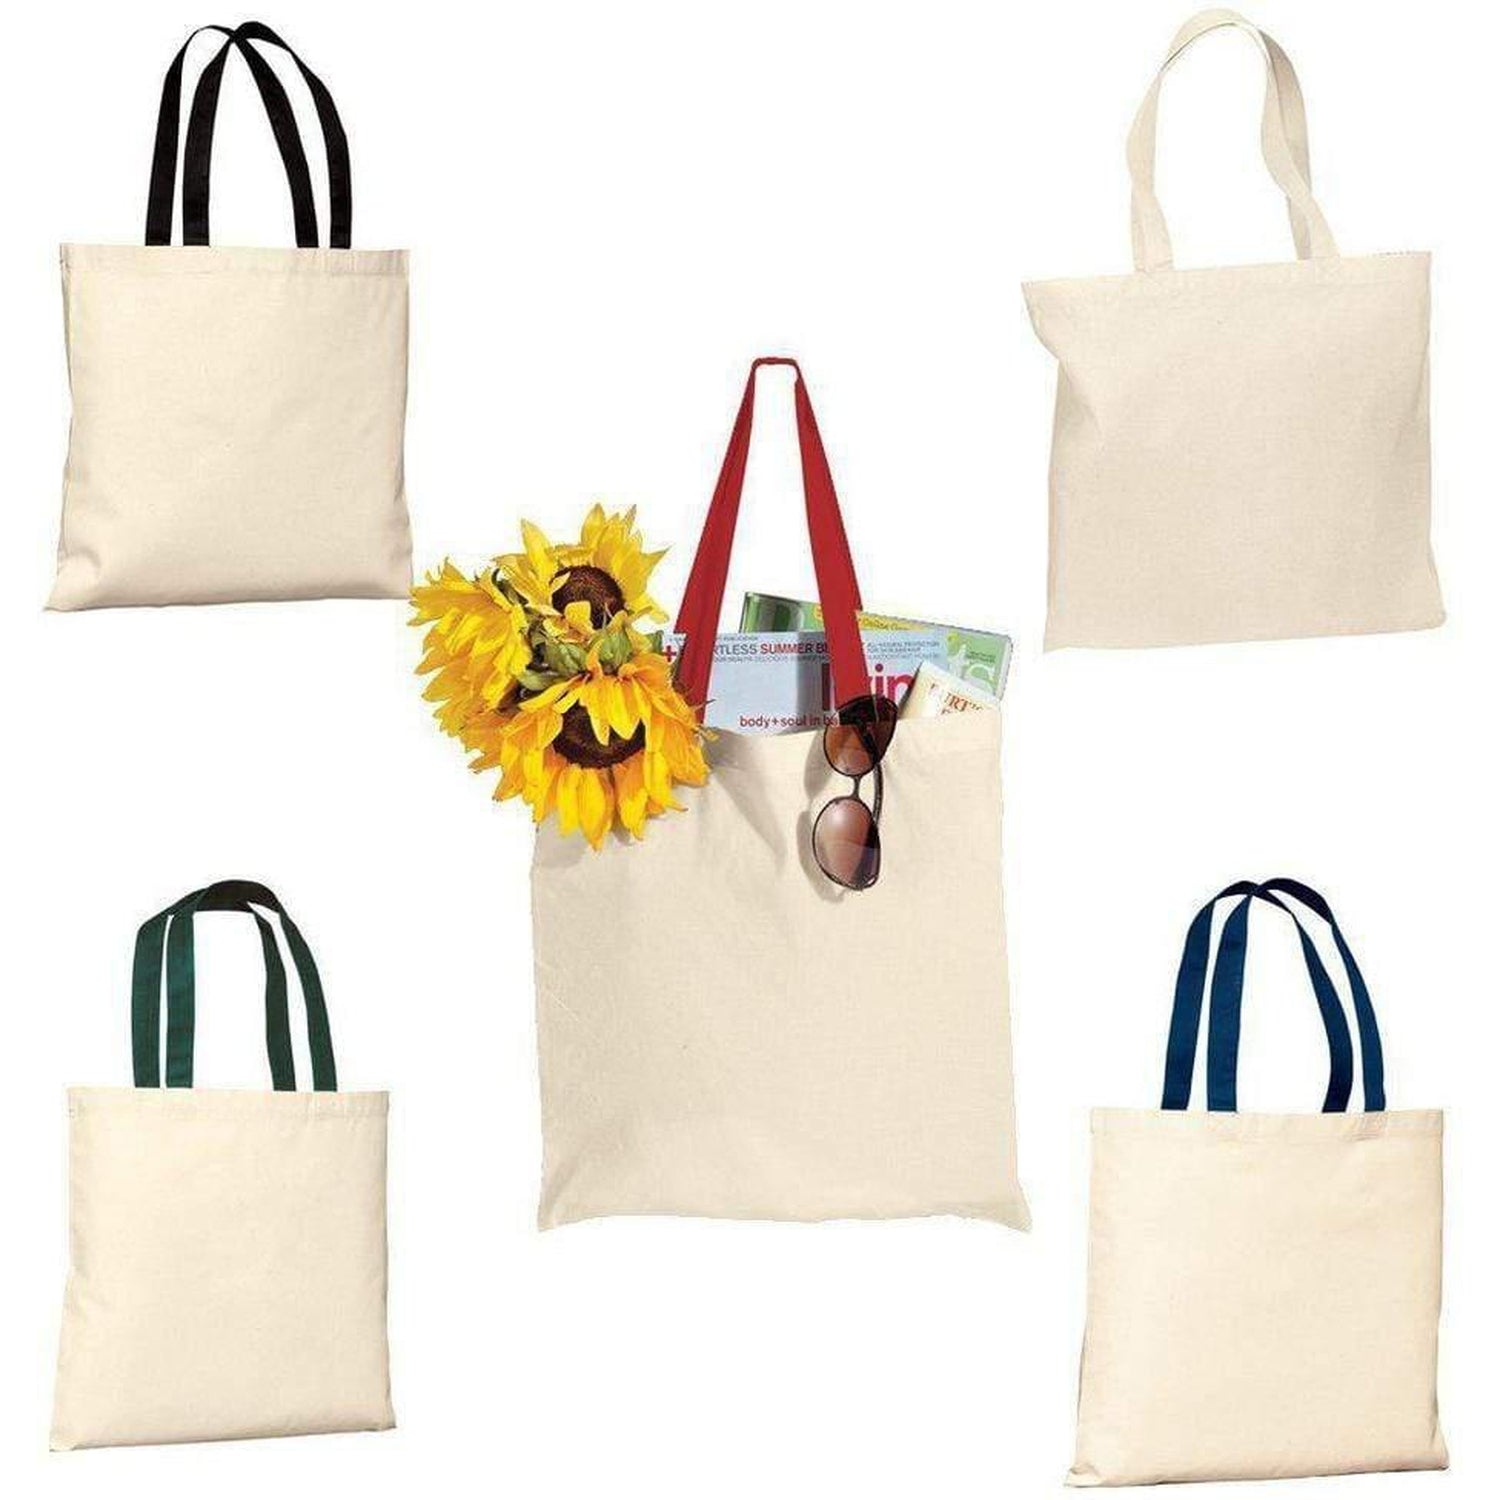 Budget Cotton Tote Bags, Basic Cotton Totes with Color Handles – BagzDepot™